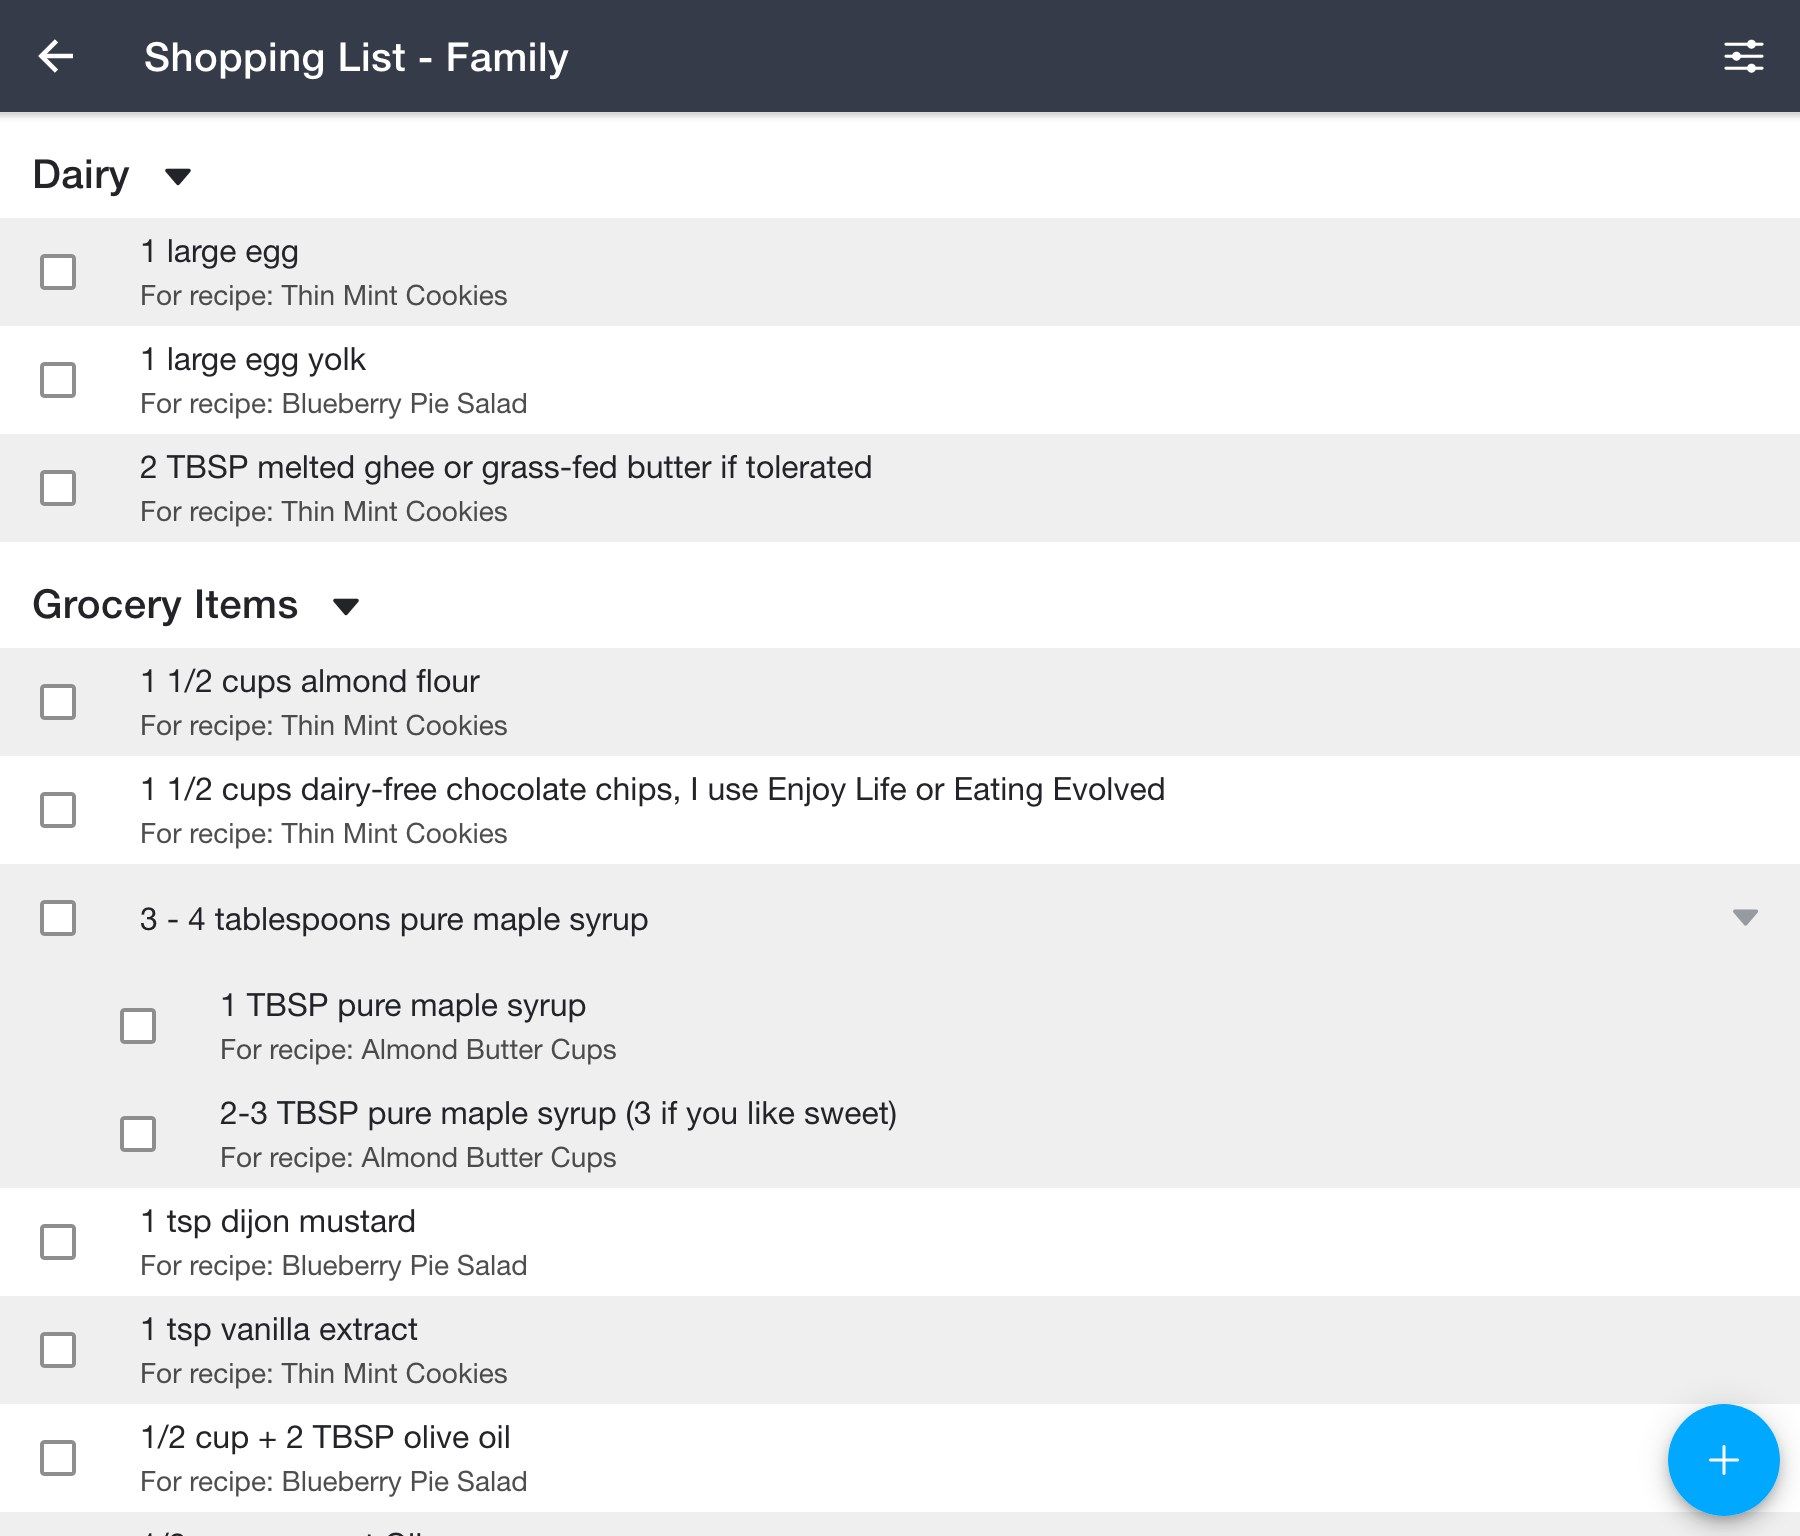 Viewing an example shopping list with grouping by category and grouping by similar items turned on